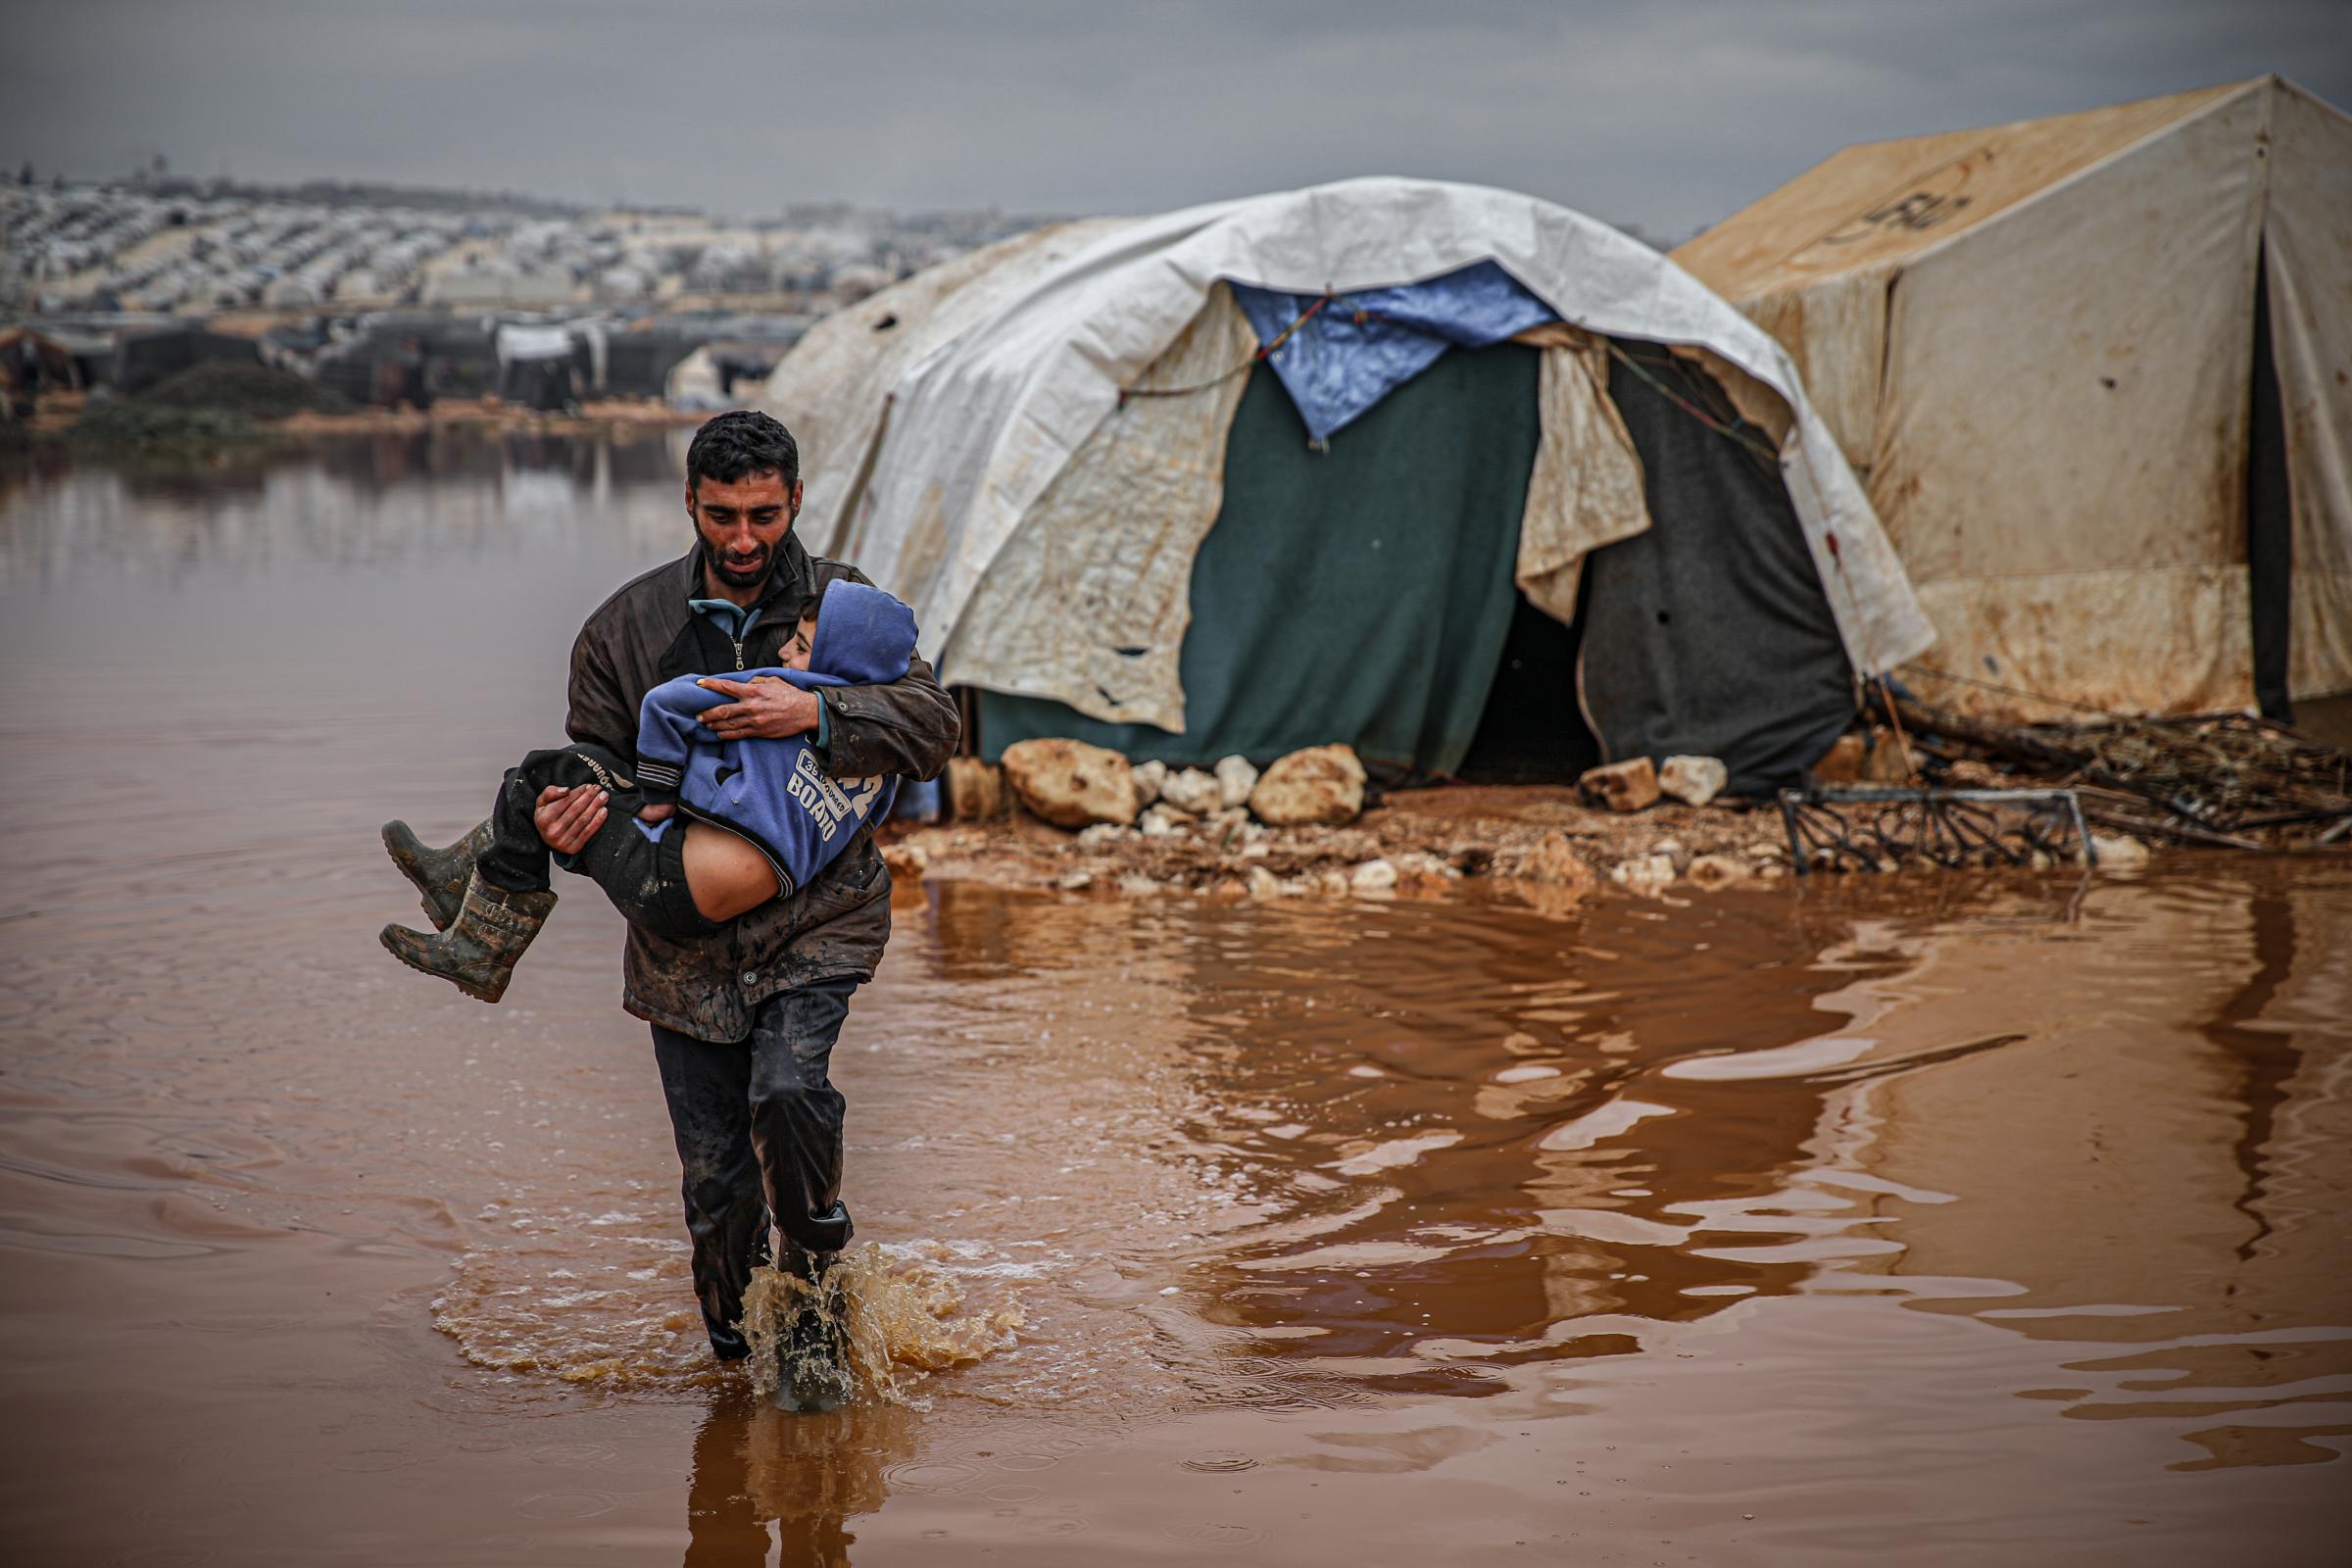 IDLIB, SYRIA - JANUARY 19: Syrian civilian carries a child as they evacuate their belongings from flooded tents at the Kefer Lusin refugee camp after heavy rain caused floods in Idlib, Syria on January 19, 2021. Civilians, who fled the attacks of Assad Re